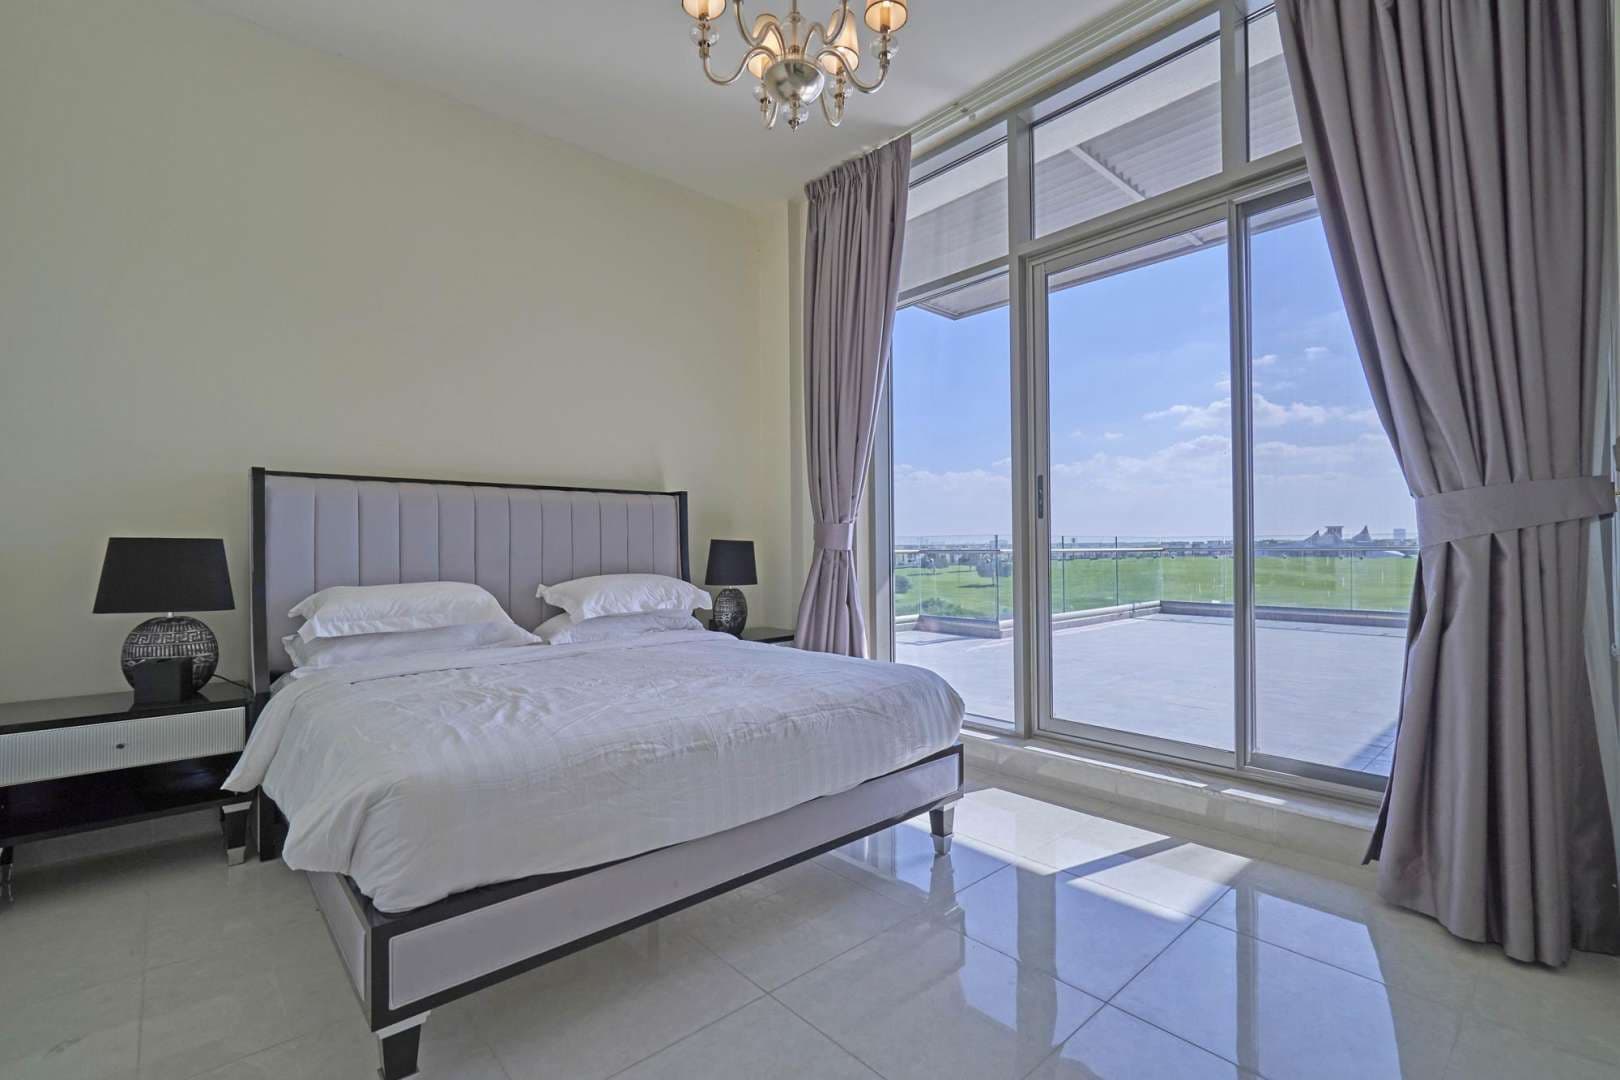 2 Bedroom Penthouse For Rent The Polo Residence Lp05454 1348b14b699c7900.jpg